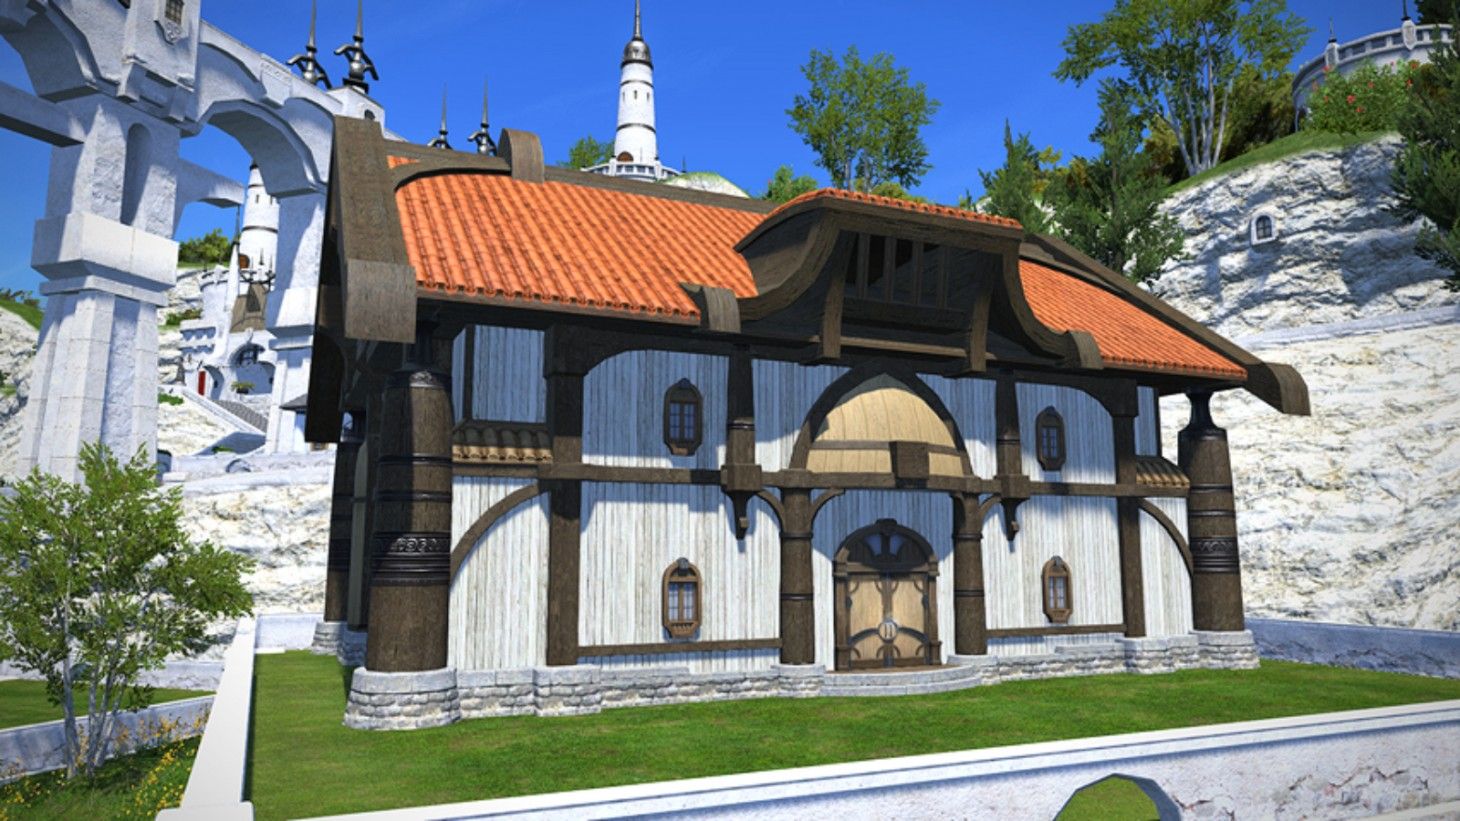 Final Fantasy 14’s Second Housing Lottery is Here